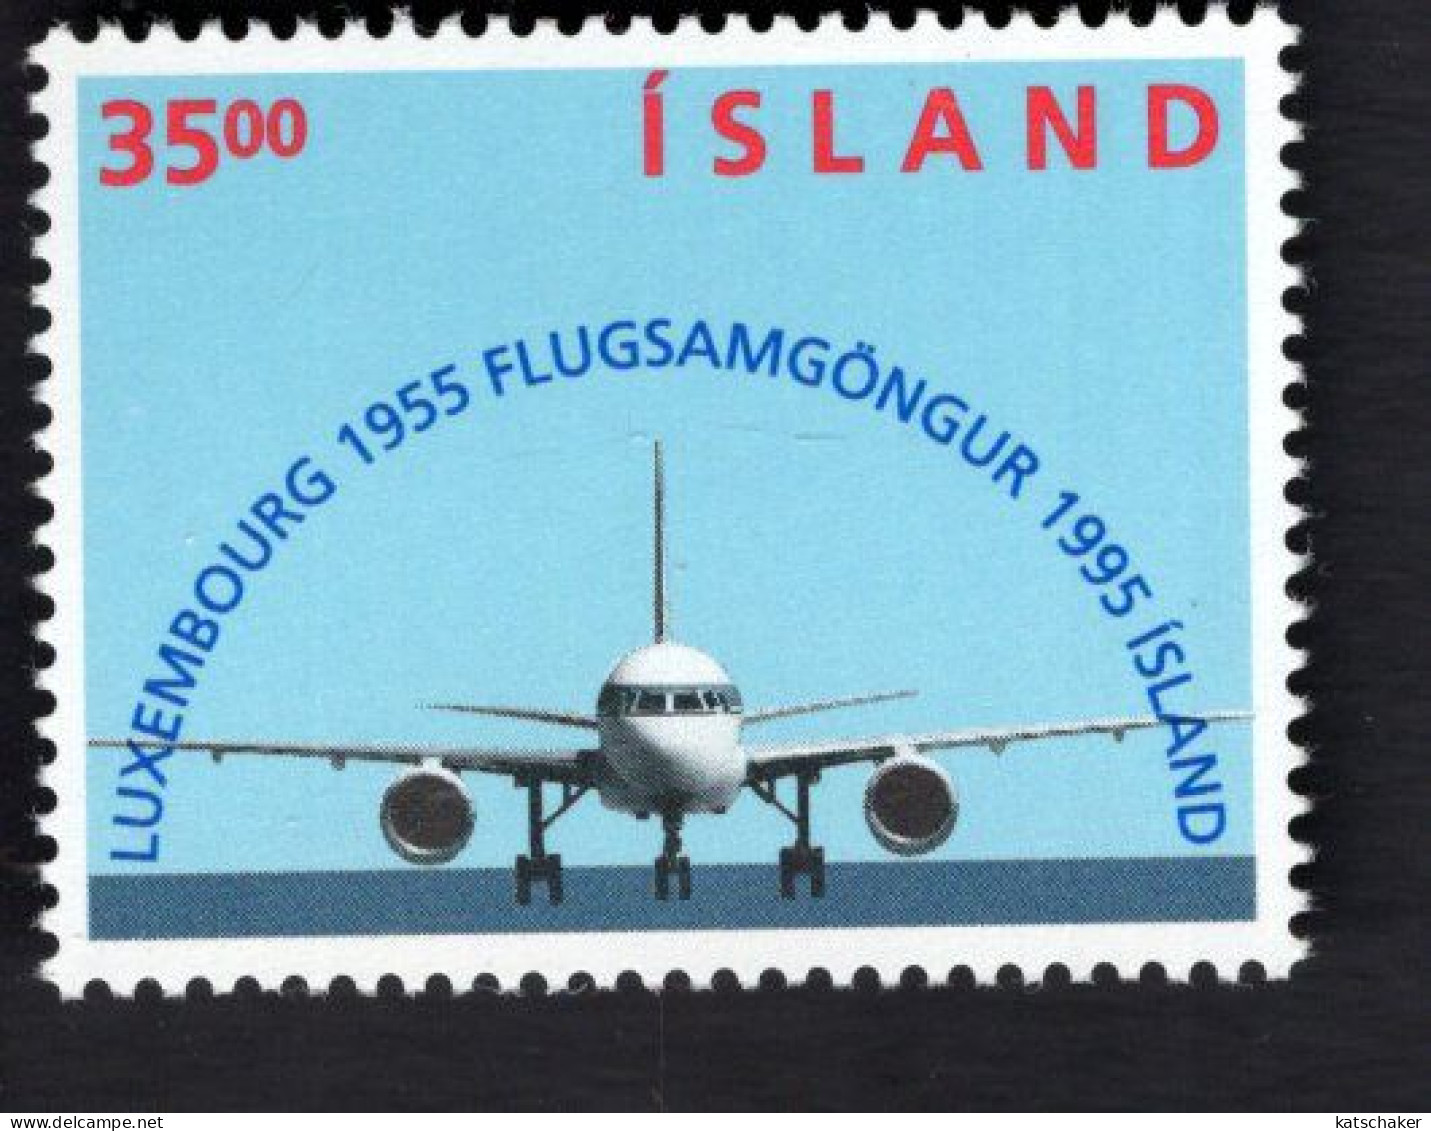 2021899565 1995 SCOTT 807 (XX)  POSTFRIS MINT NEVER HINGED - LUXEMBOURG-REYKJAVIK ICELAND AIR ROUTE - 40TH ANNIV - Neufs